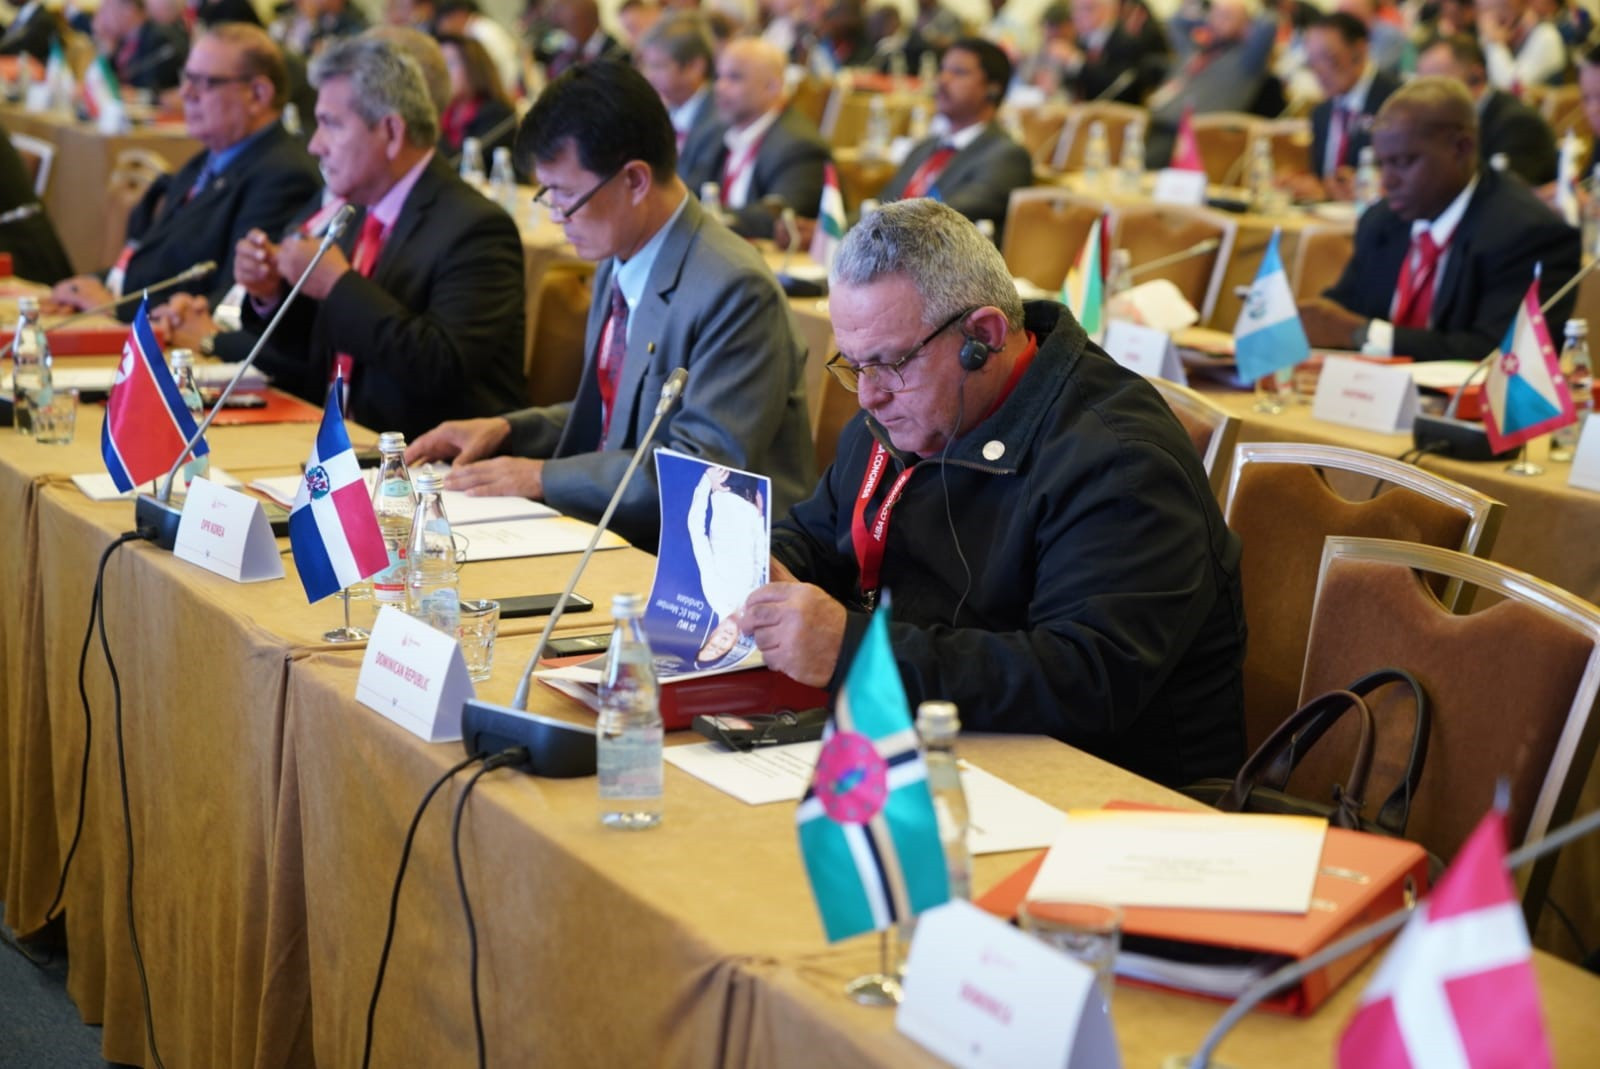 The statute changes are set to be discussed at an Extraordinary AIBA Congress in December ©AIBA